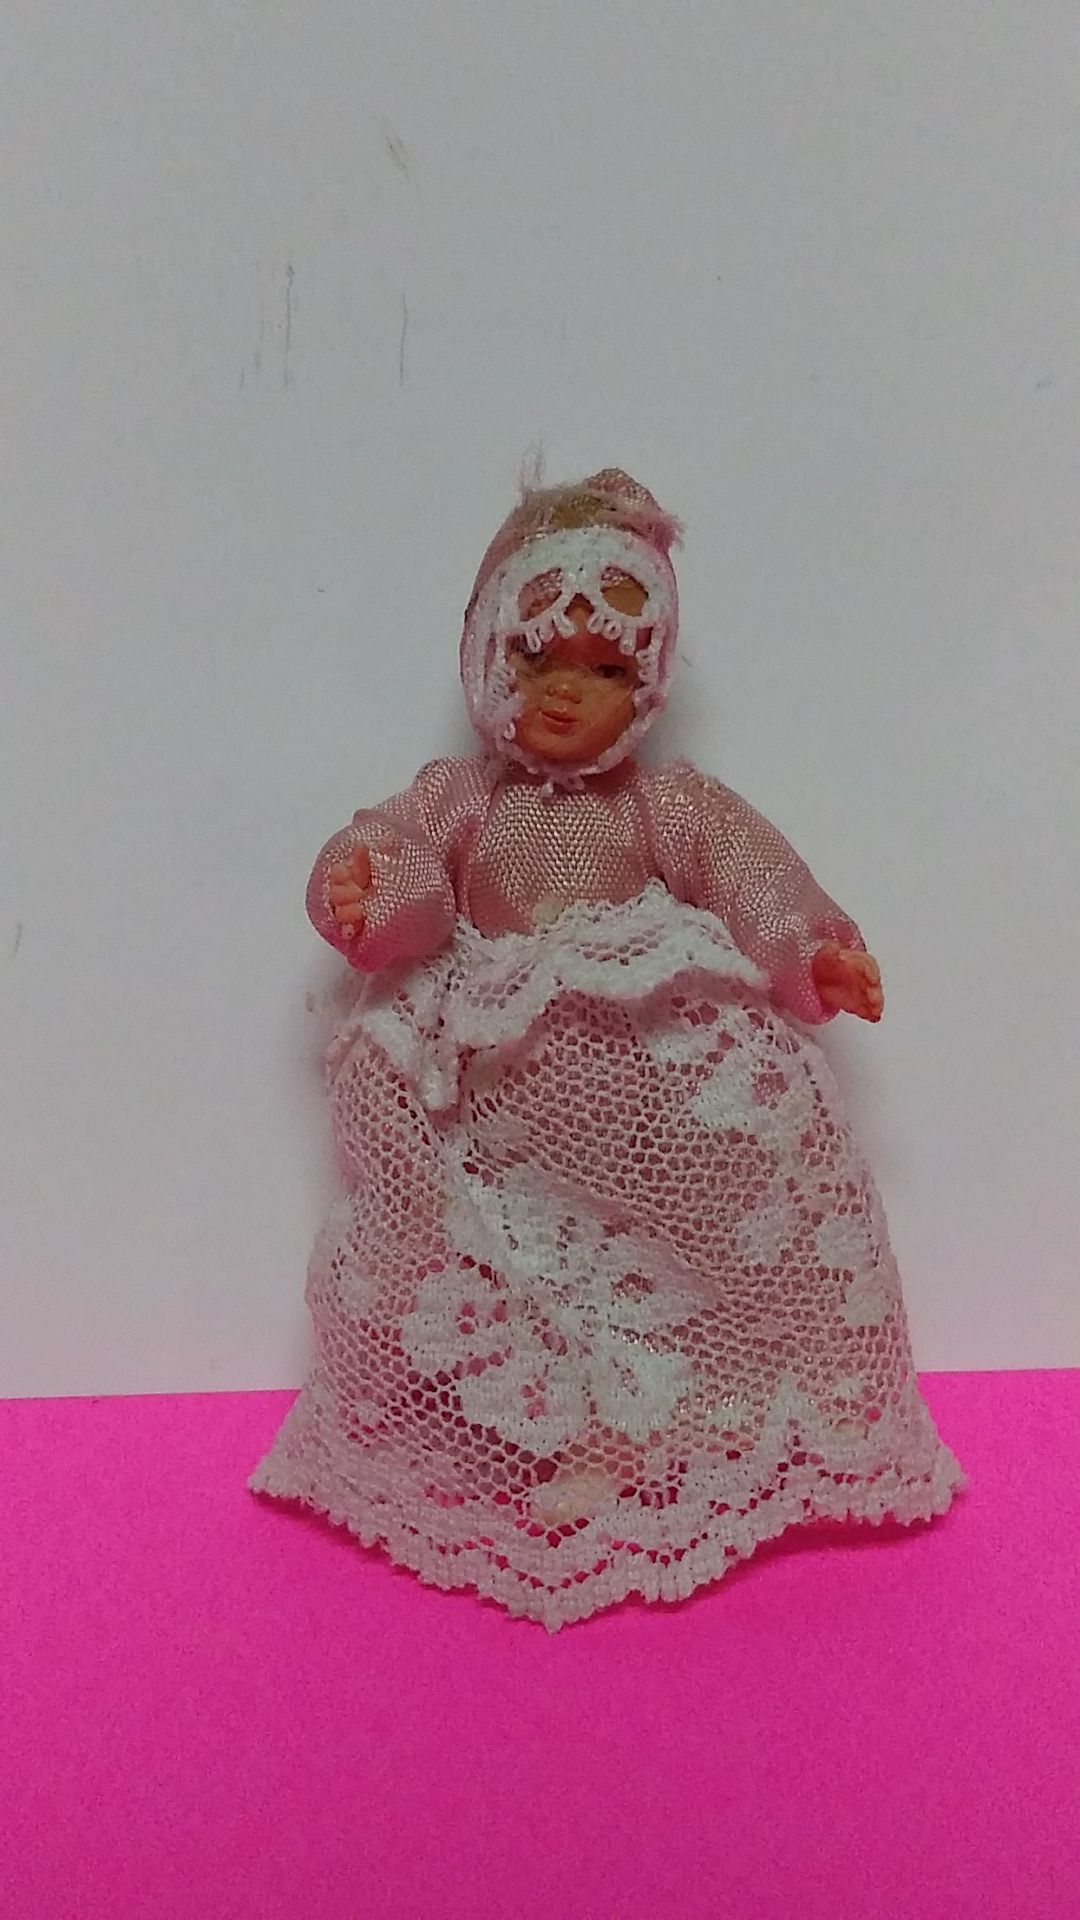 Vintage 2 inch Baby Doll